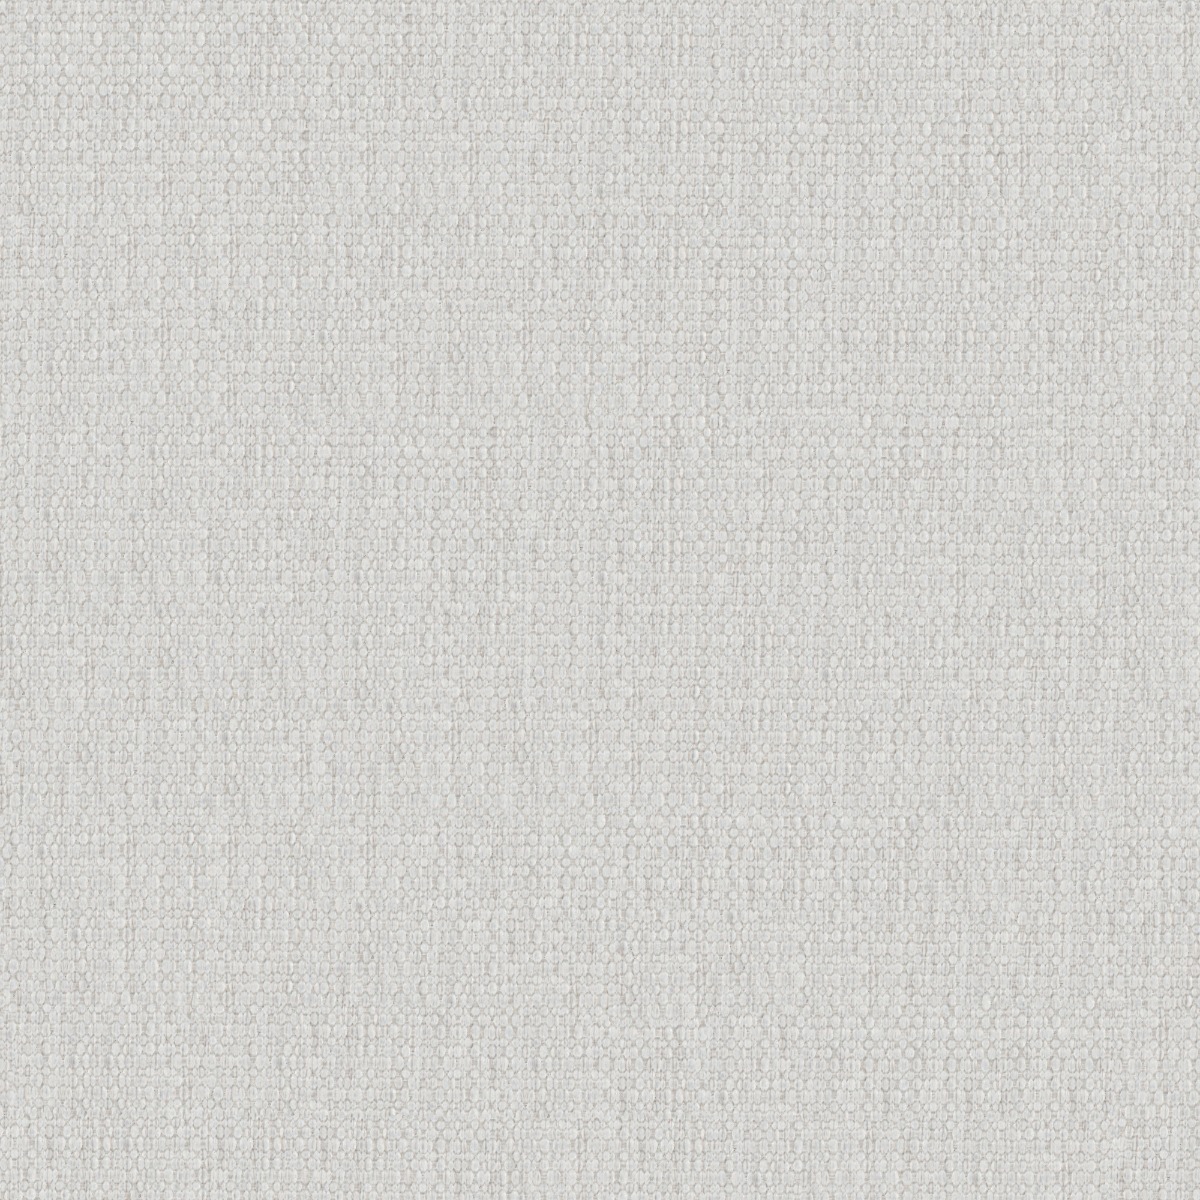 A seamless fabric texture with plain white texture units arranged in a None pattern